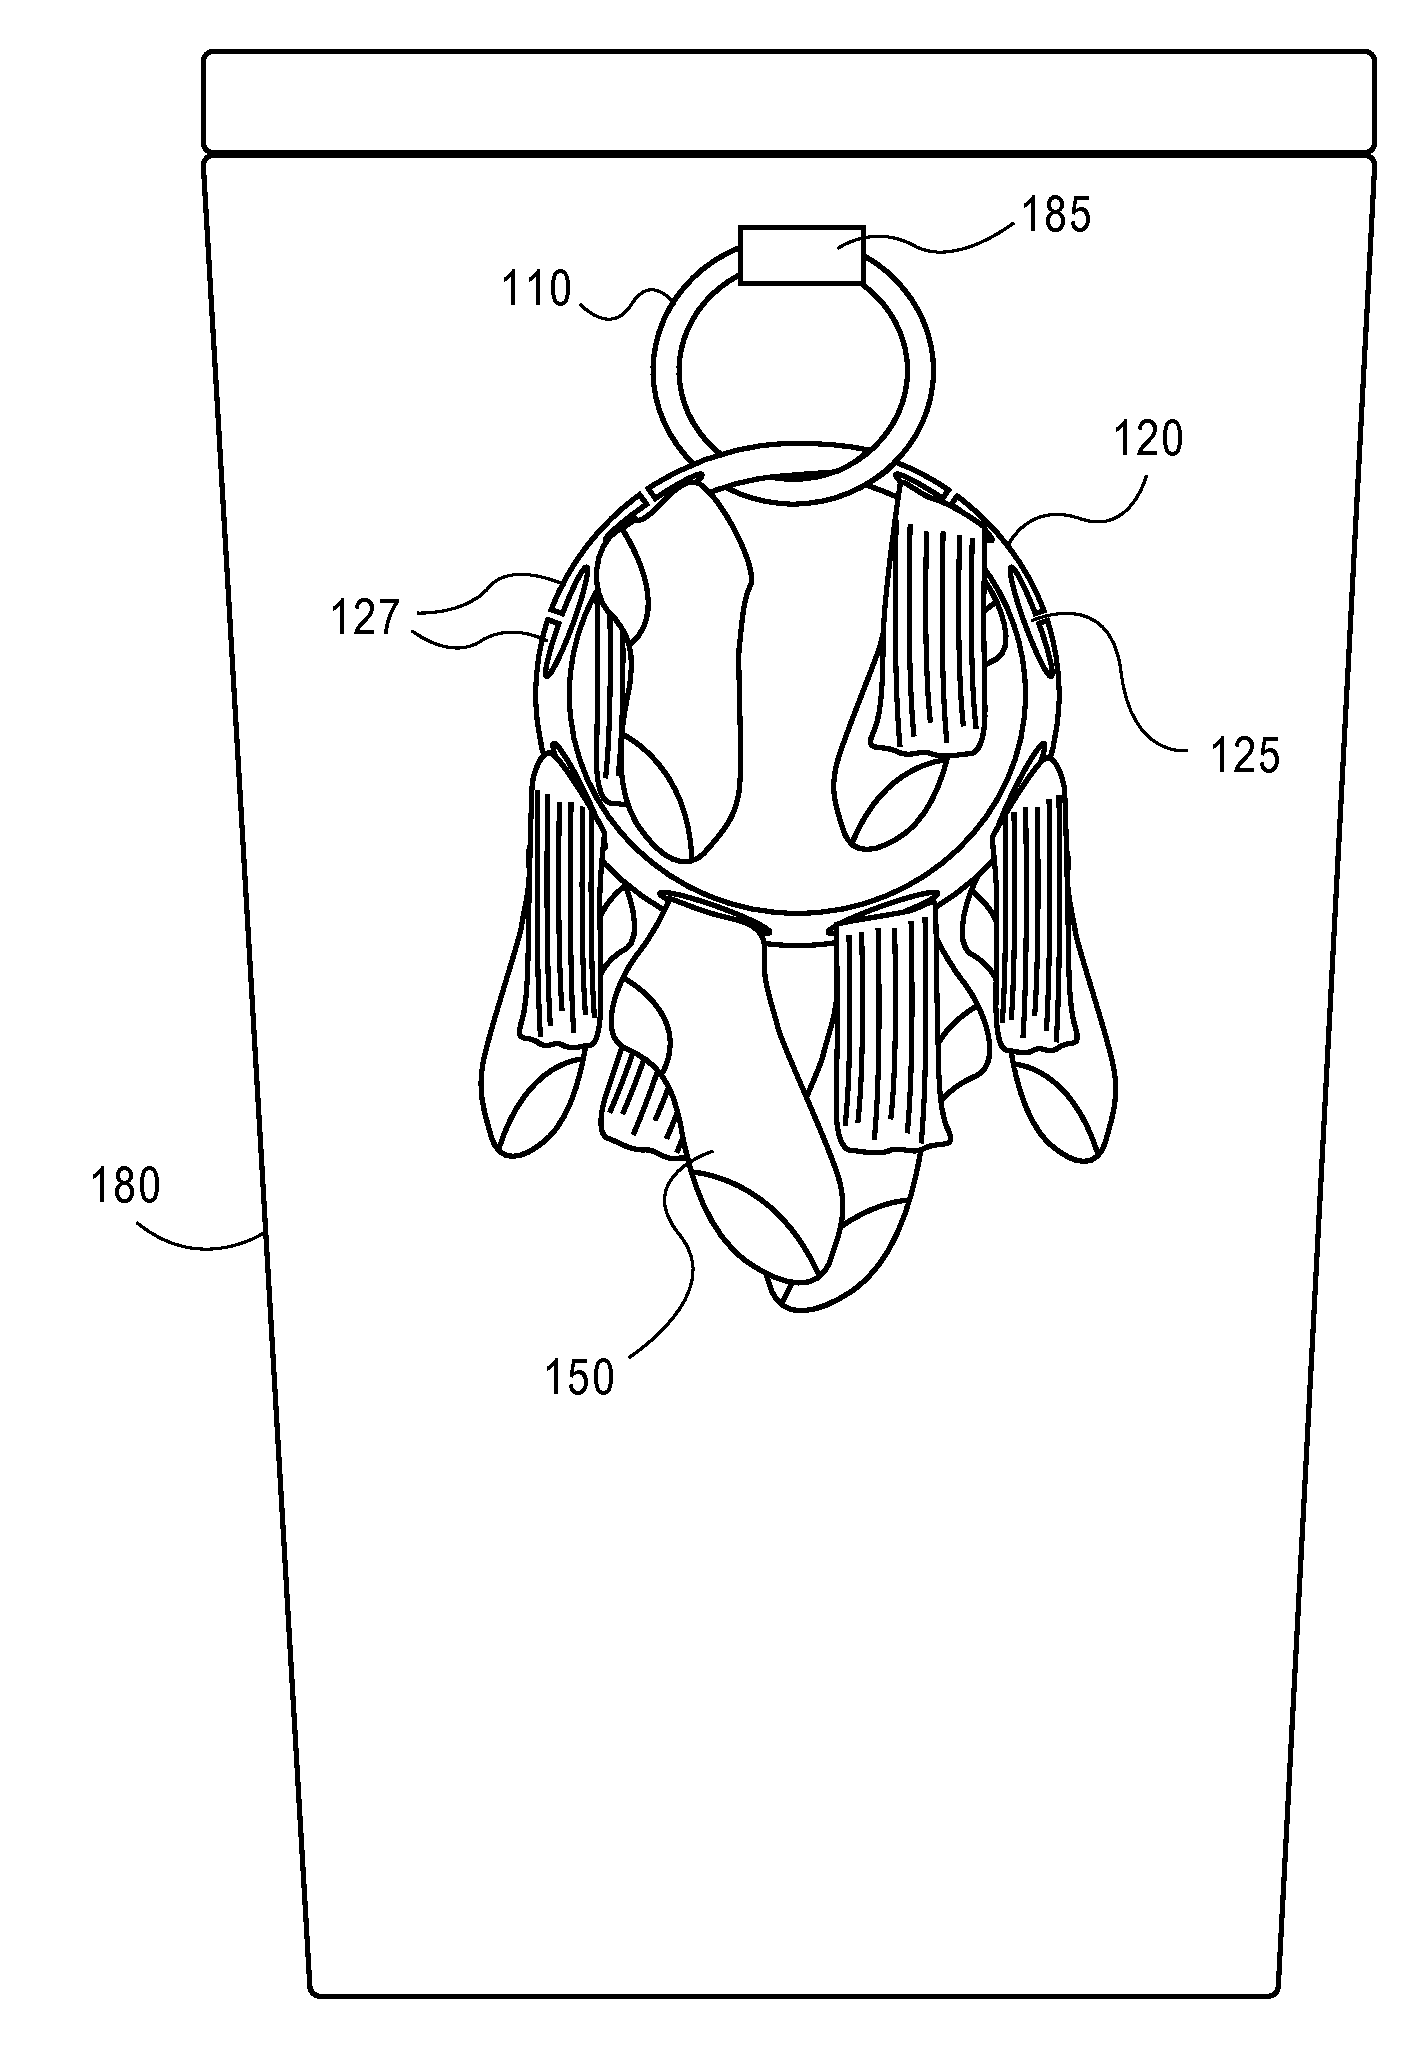 Apparel holding system, apparel holding device for wash/dry cycle, method of fabricating apparel holding device for wash/dry cycle